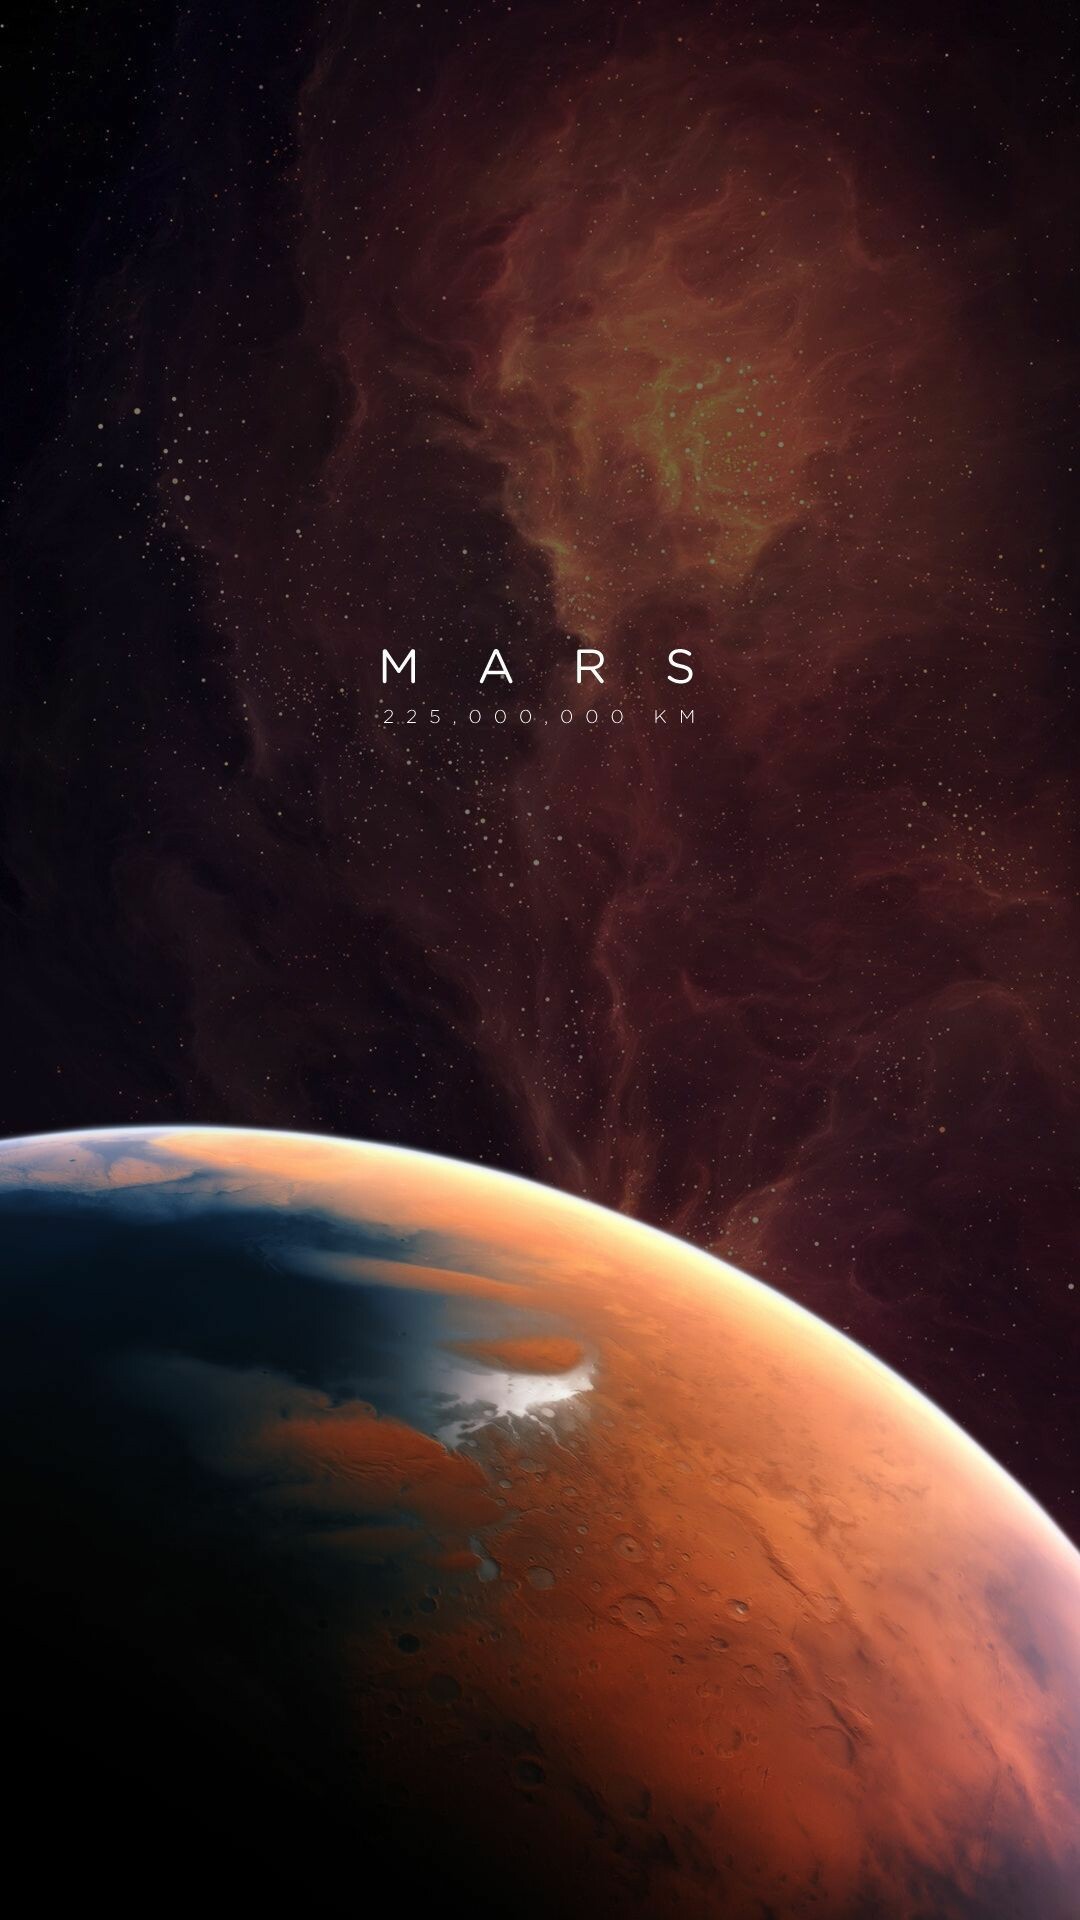 Mars: The planet orbits the Sun once in 687 Earth days. 1080x1920 Full HD Background.